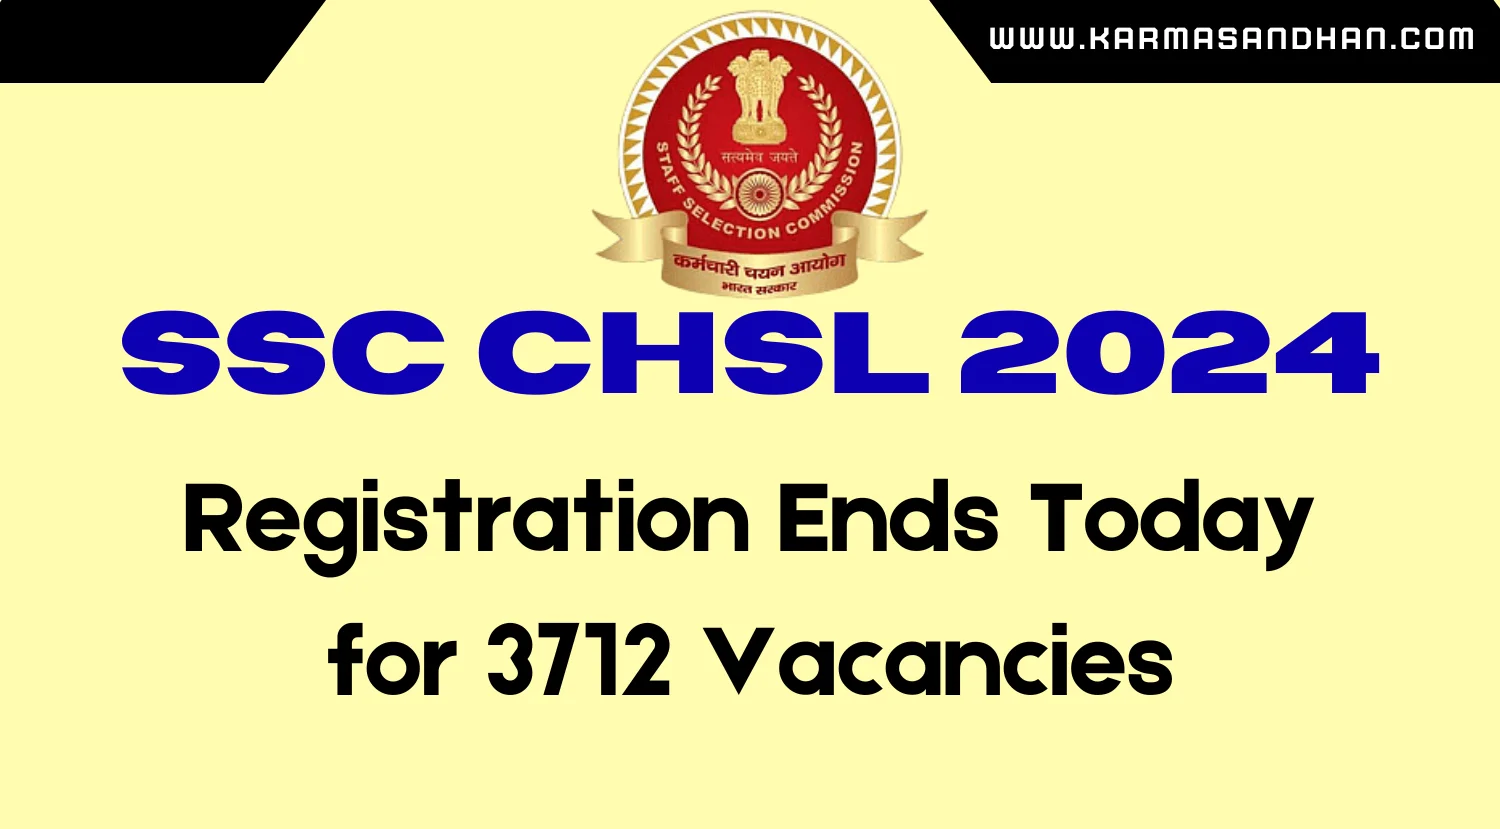 SSC CHSL 2024 Registration Window Closes Today, Apply Now for 3712 Vacancies